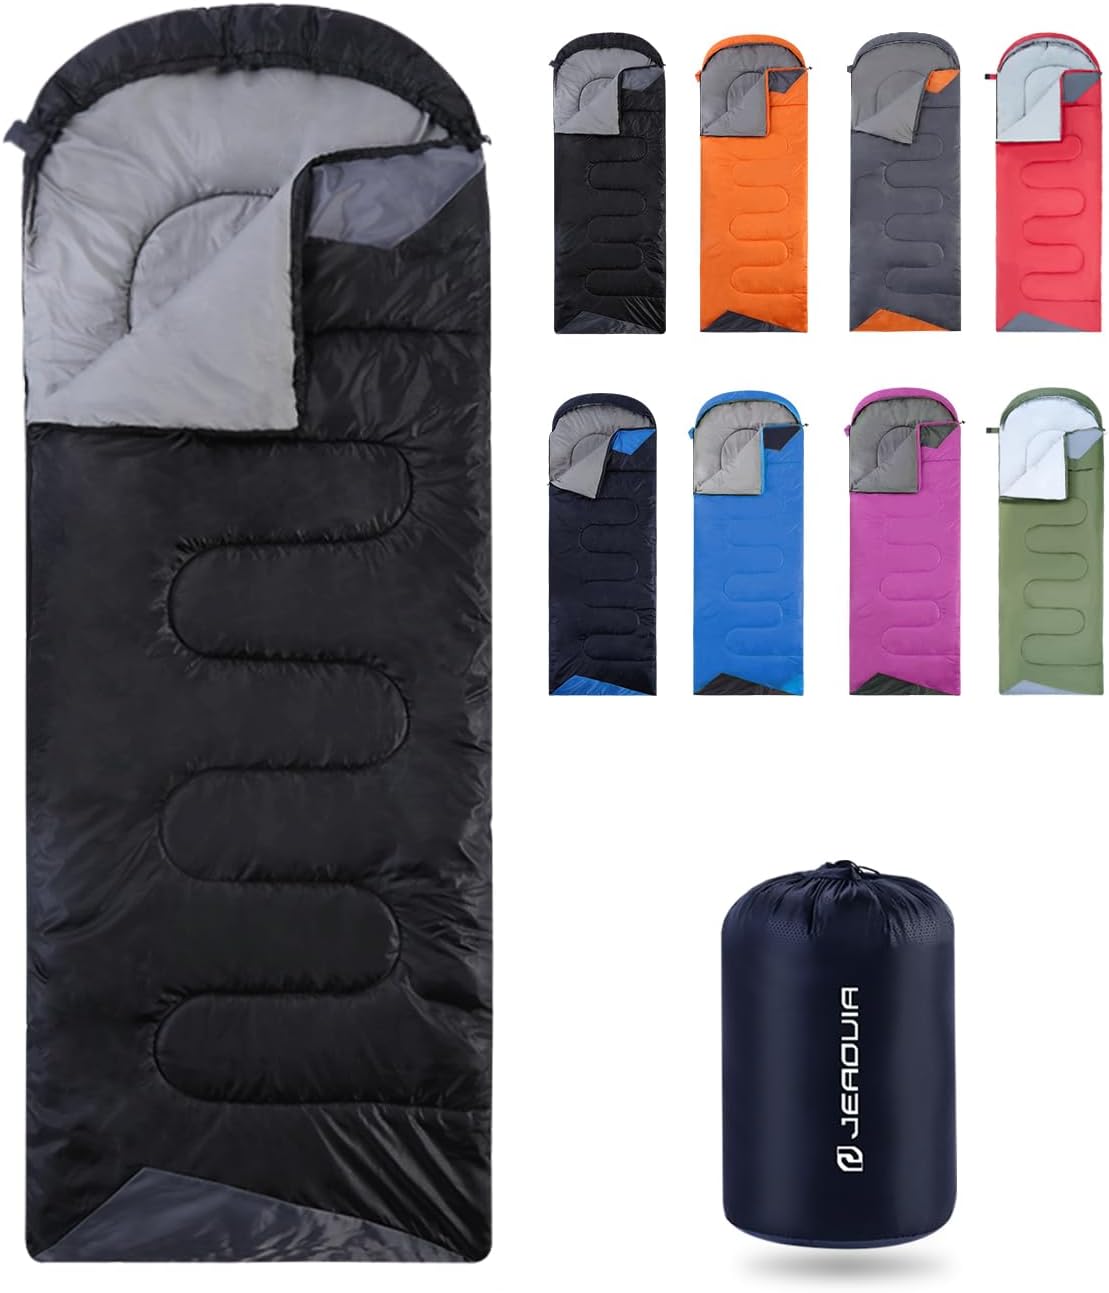 Sleeping Bags for Adults Backpacking Lightweight Waterproof- Cold Weather Sleeping Bag for Girls Boys Mens for Warm Camping Hiking Outdoor Travel Hunting with Compression Bags